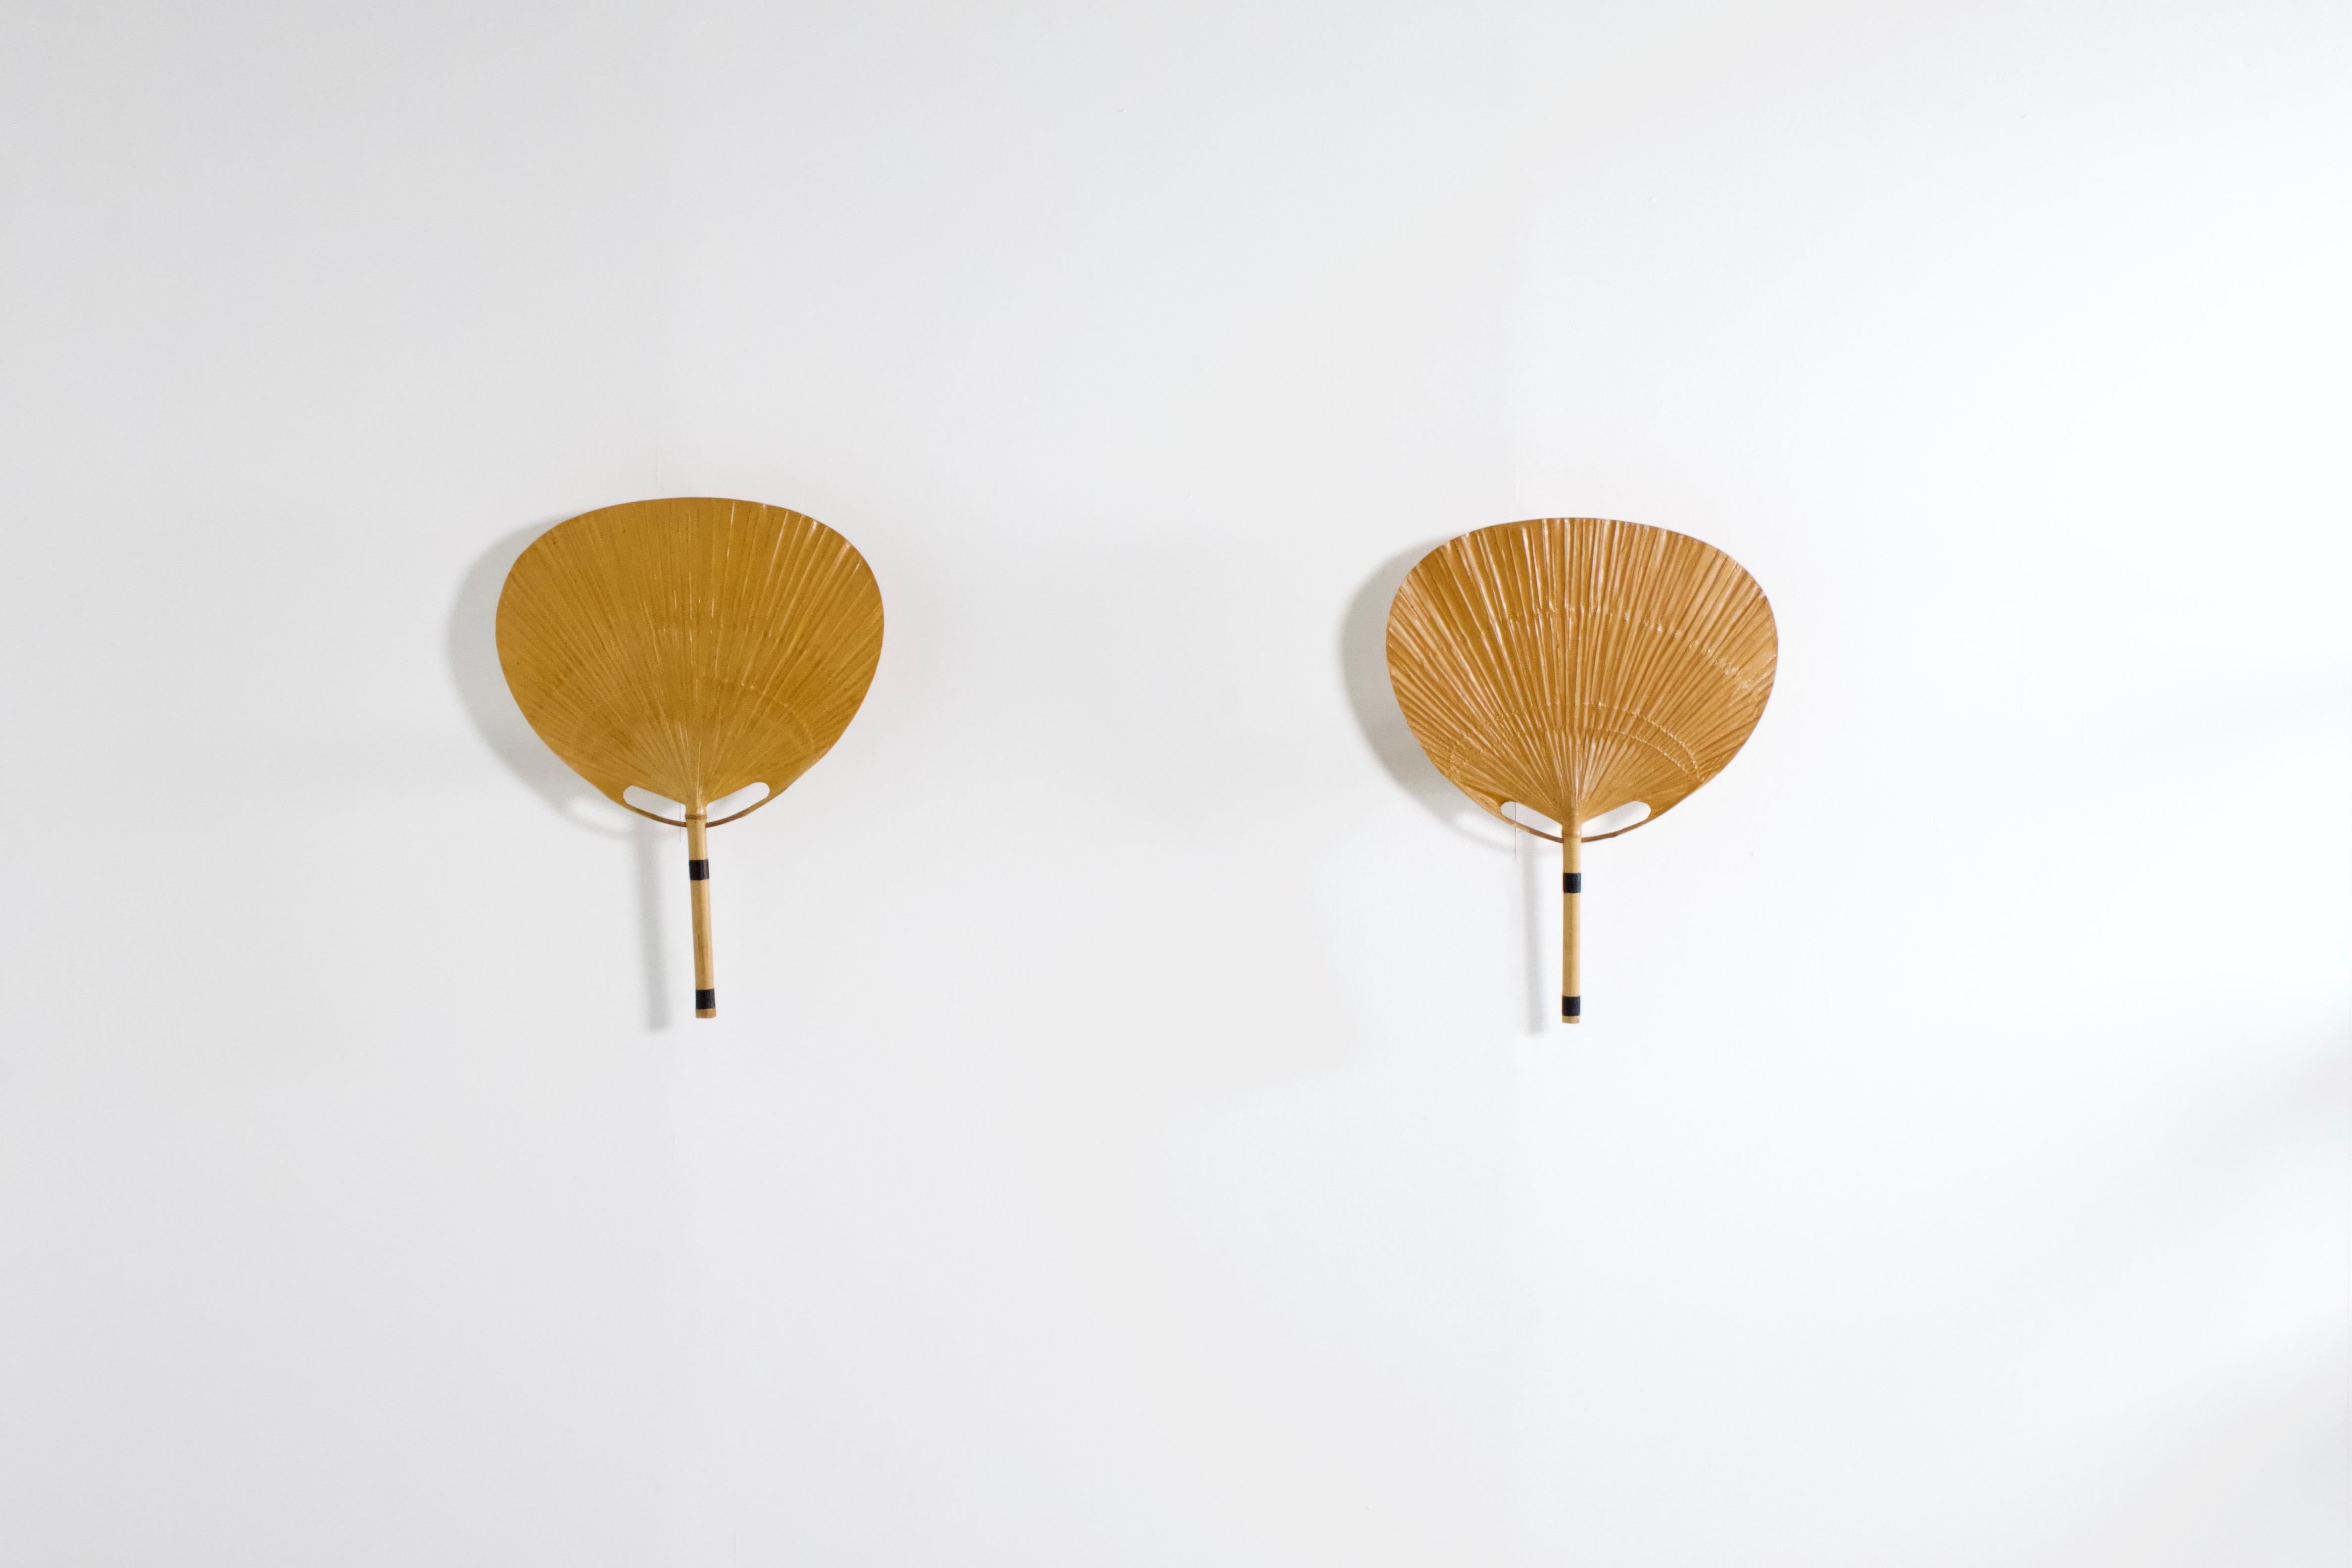 Set of ‘Uchiwa’ fan wall lamps by Ingo Maurer in very good condition. 

Designed by Ingo Maurer for M design, Germany. 

These lamps were handmade in 1977 from bamboo, wicker and Japanese rice paper. 

They are very fragile and therefor very